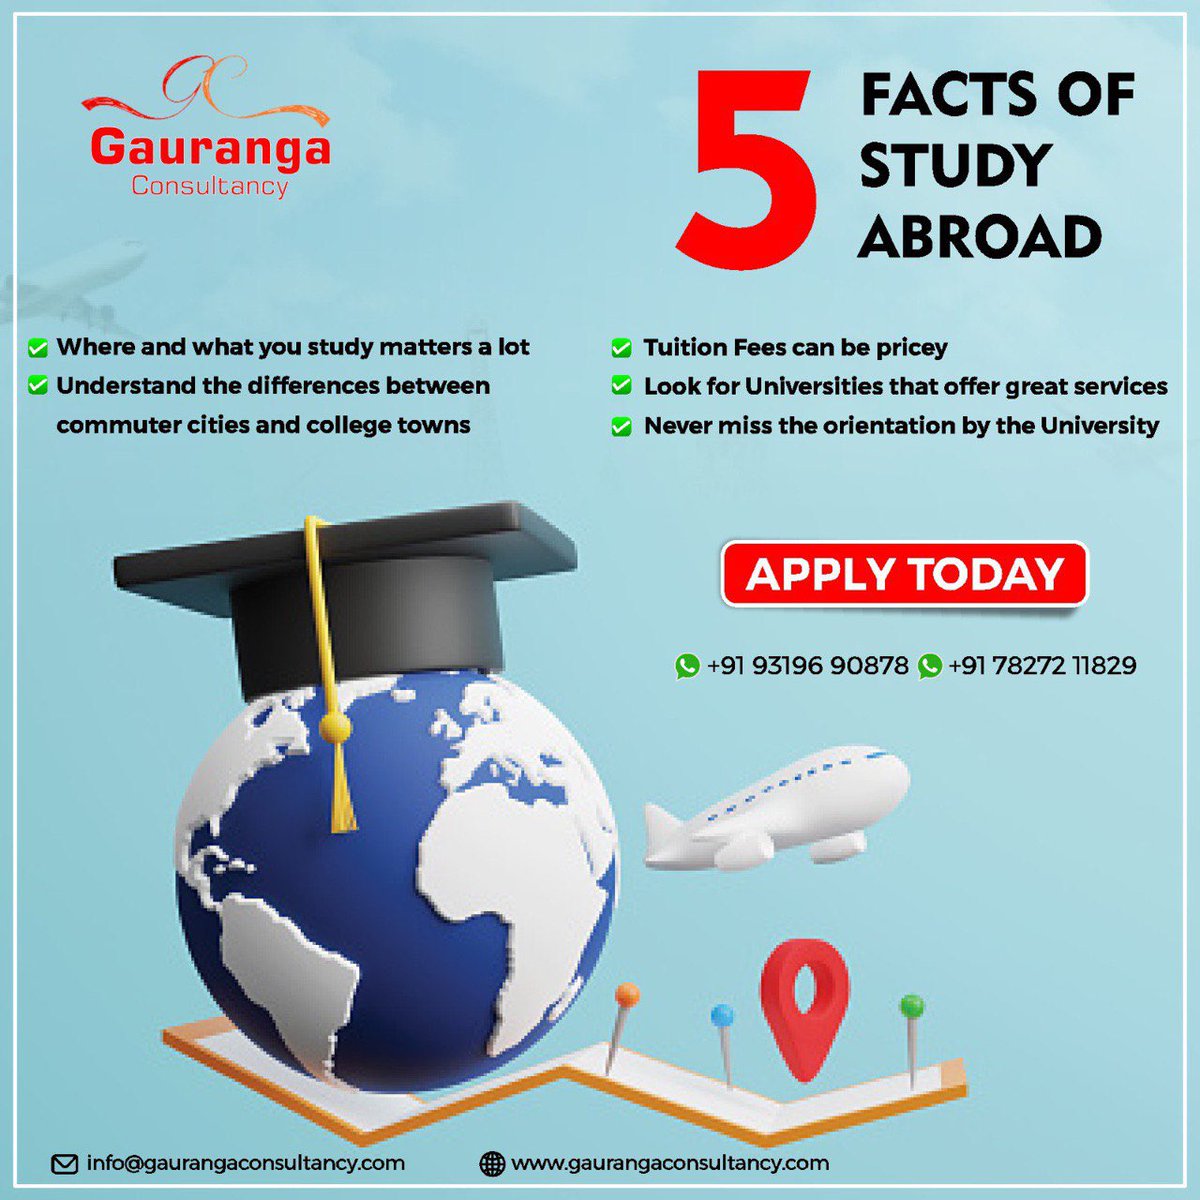 5 Facts of STUDY ABROAD 

#facts #fact #knowledge #factsdaily #didyouknow #instagram #science #dailyfacts #motivation #factsoflife #india #truth #knowledgeispower #amazingfacts #interestingfacts #generalknowledge #education #instafacts #memes #sciencefacts #funfacts #truefacts